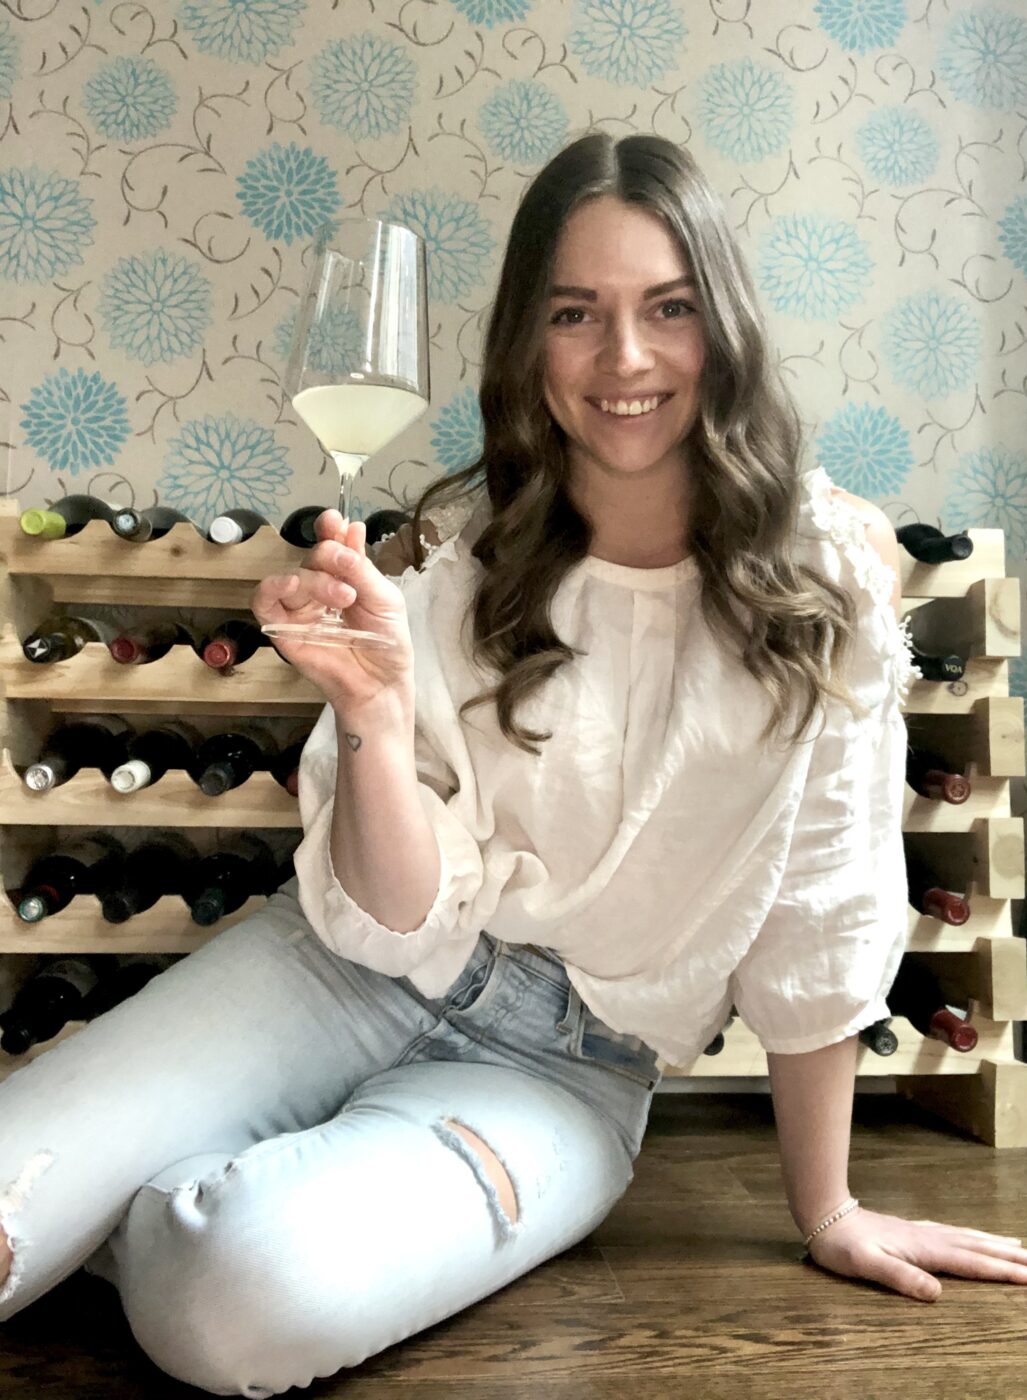 Woman sitting on a table smiling with a glass of wine in her hand